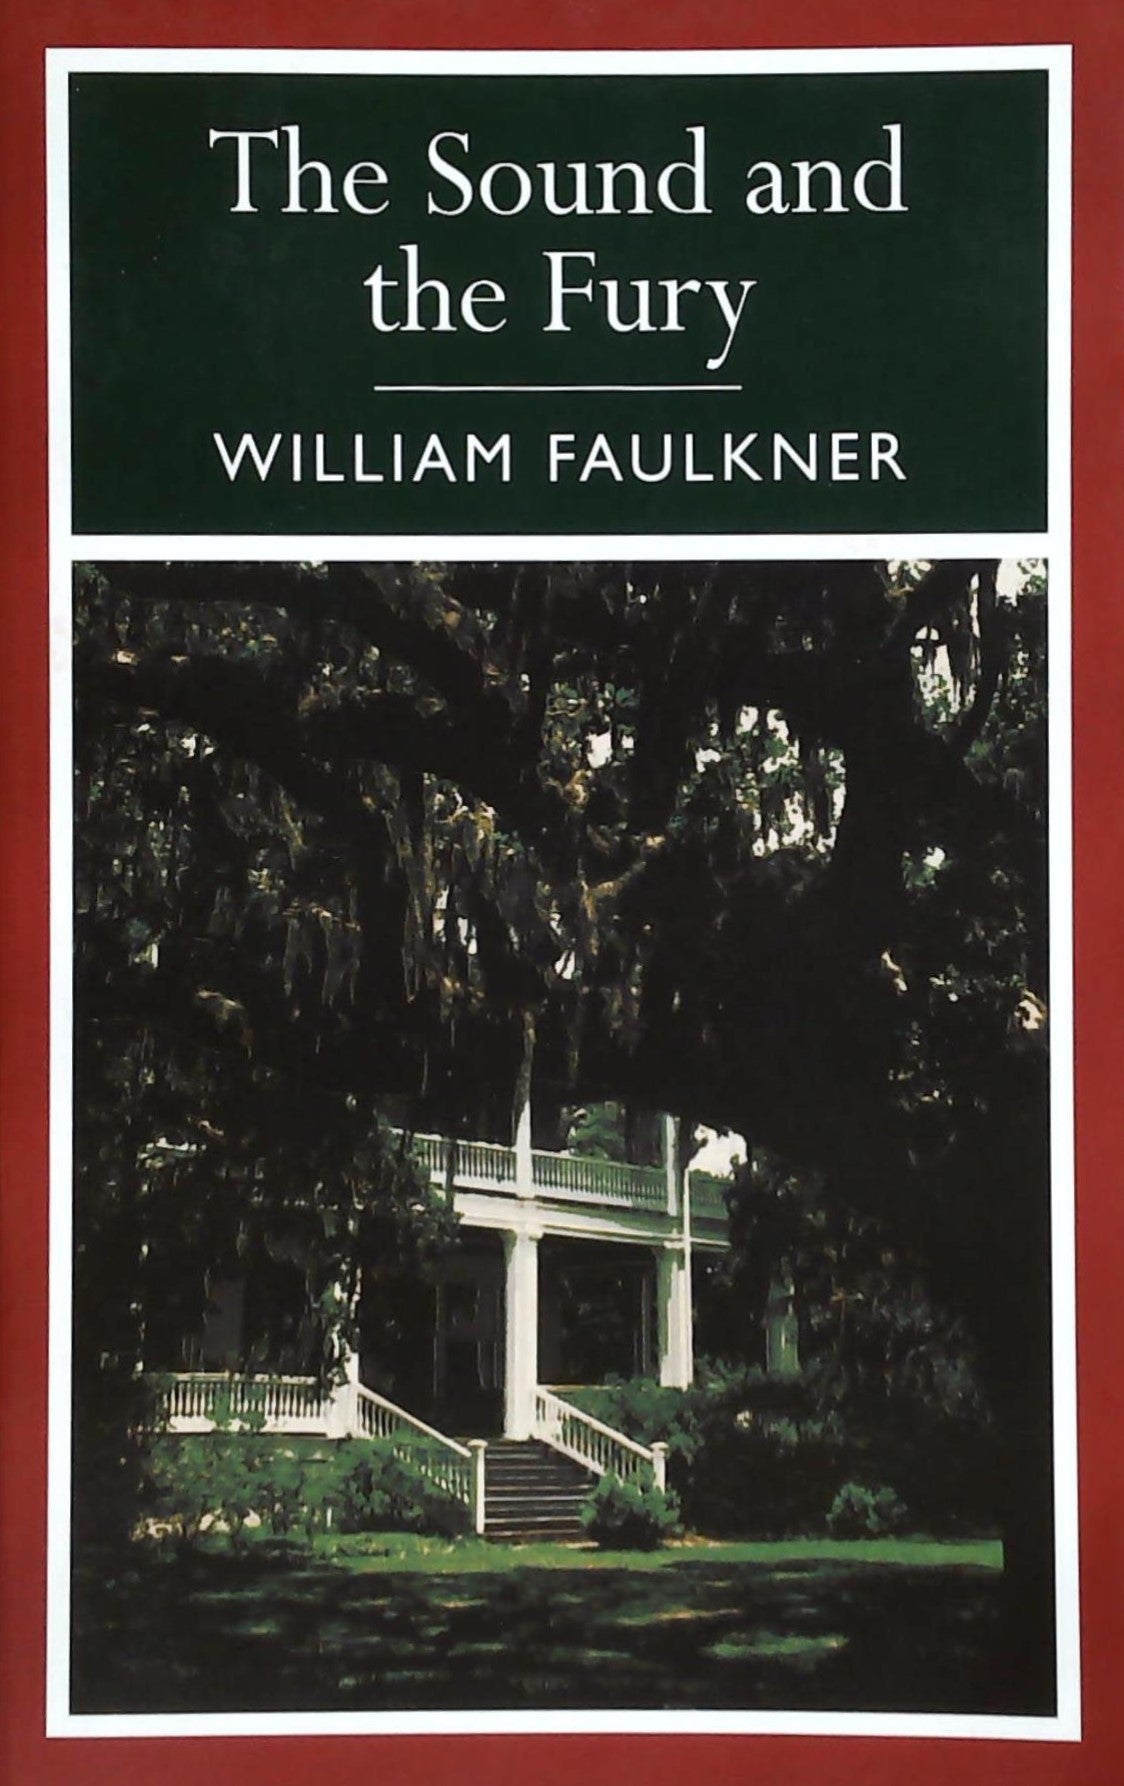 Livre ISBN  The Sound and the Fury (William Faulkner)